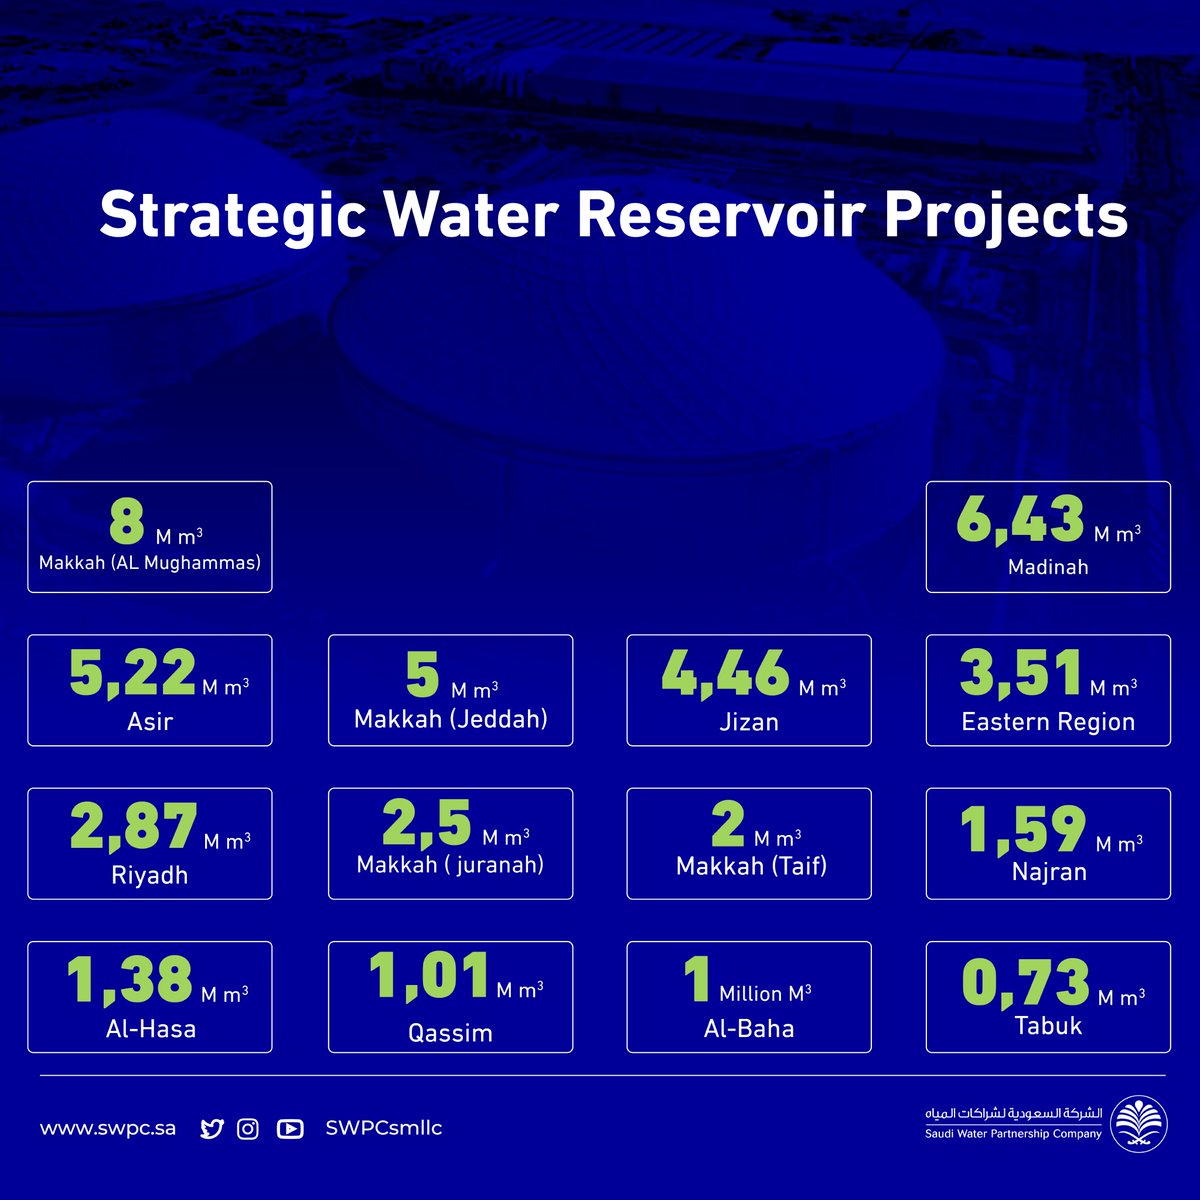 #SWPC's Strategic Water Reservoir Projects